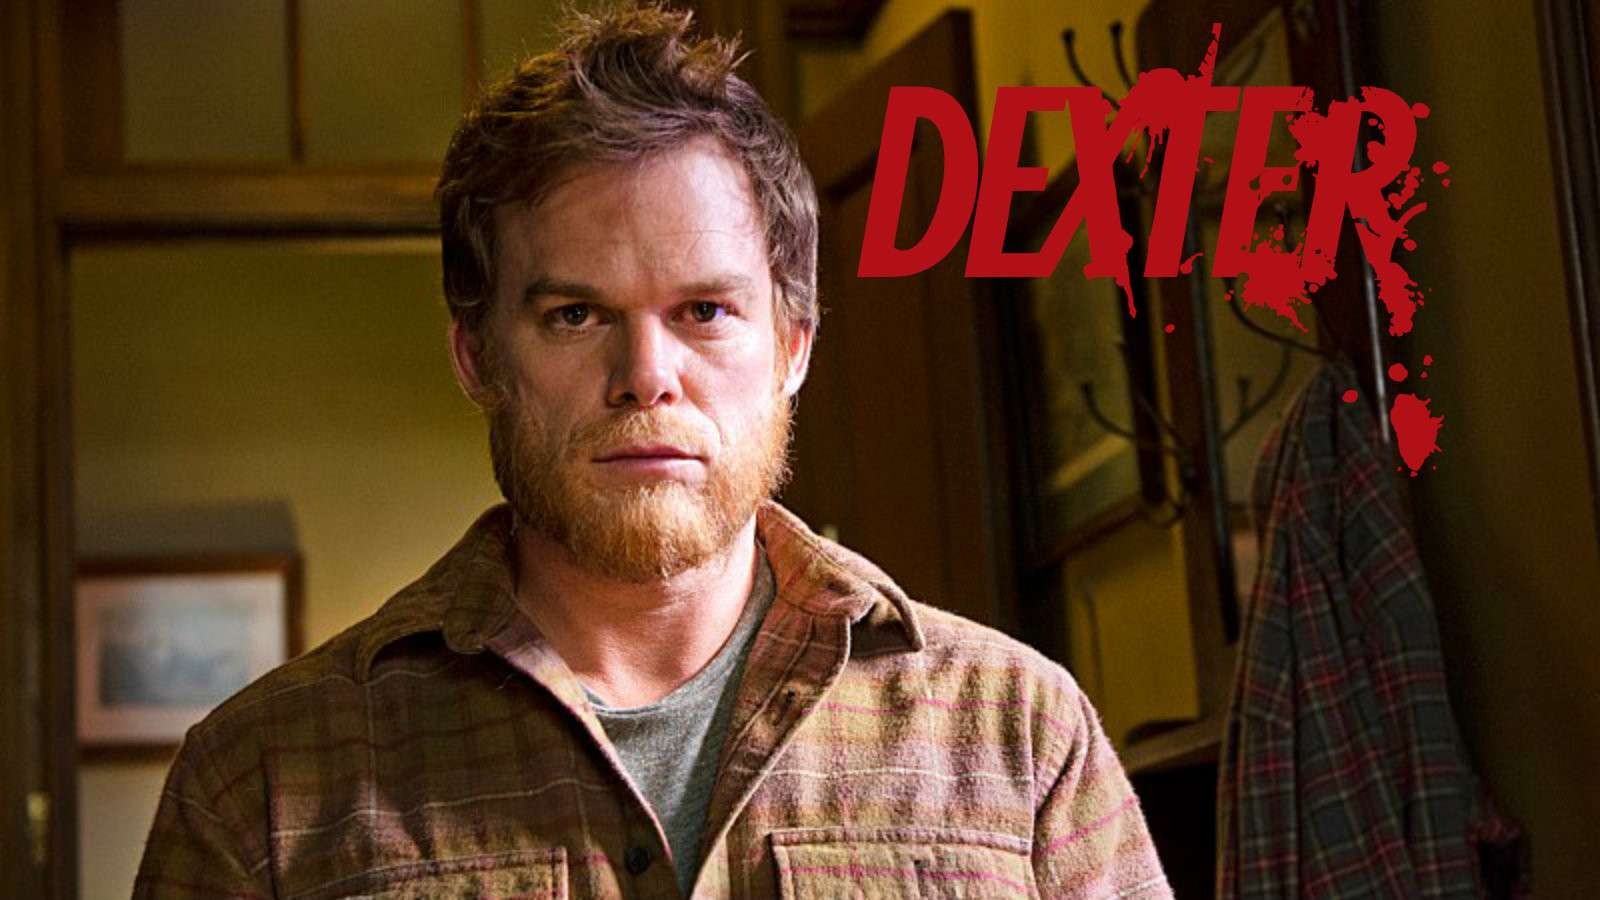 Dexter at the end of season 8